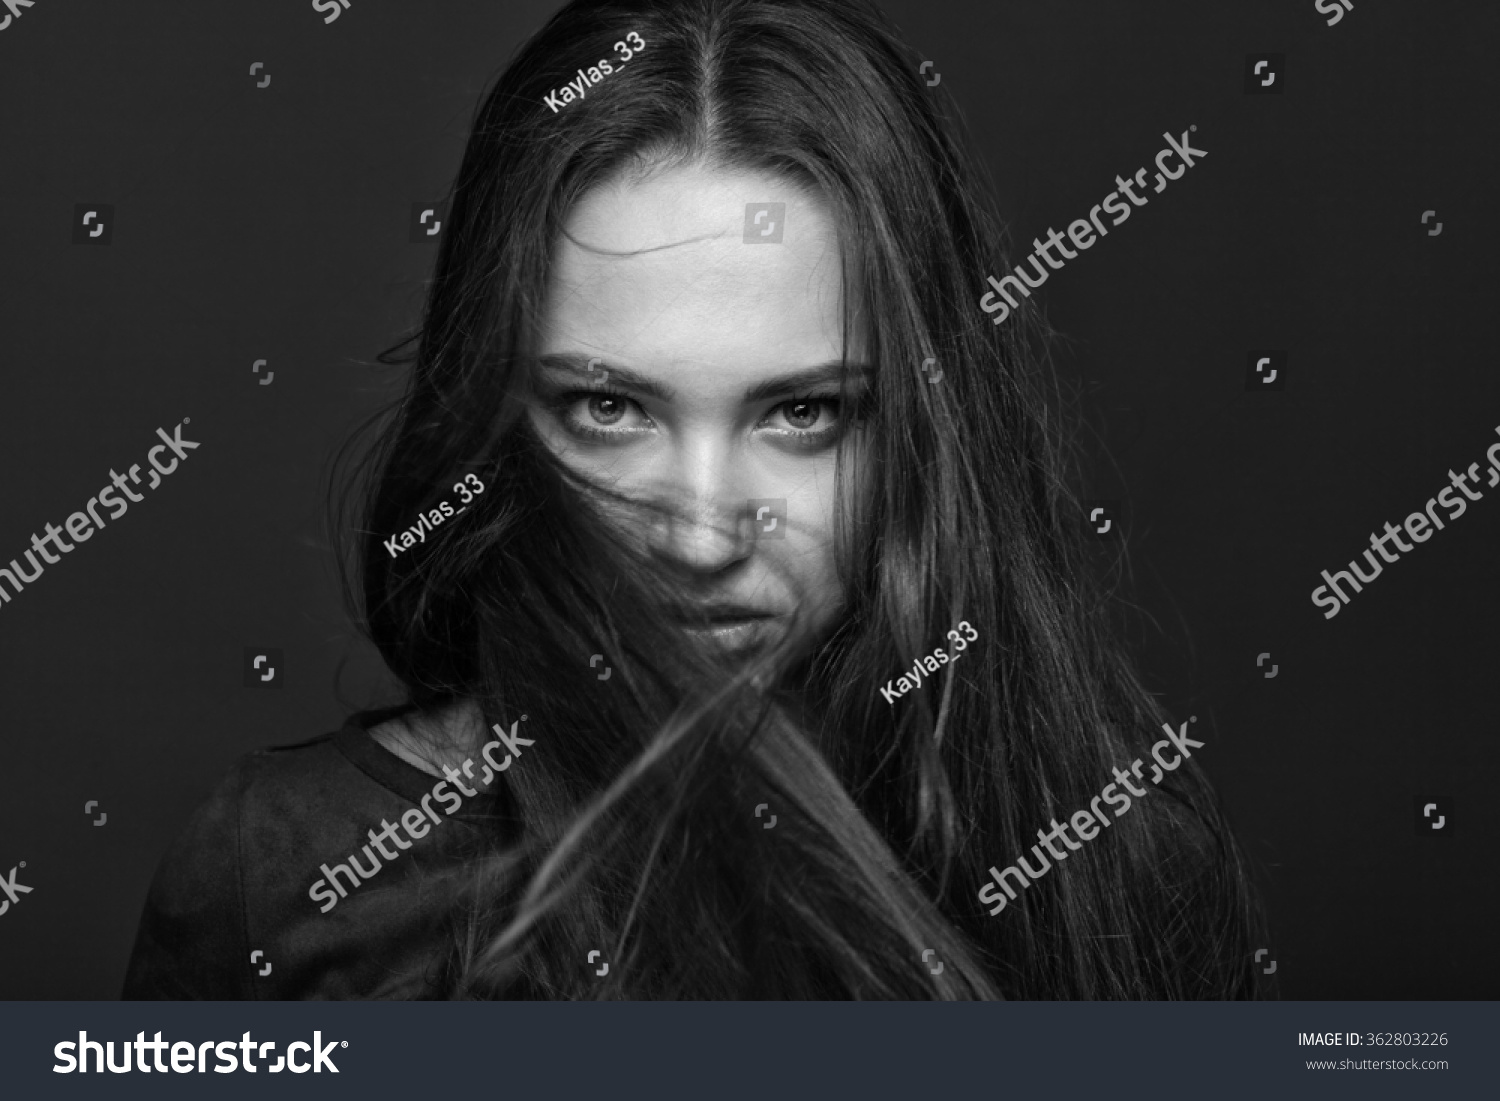 Black And White Portrait Of A Girl With A Stern Look Stock Photo ...